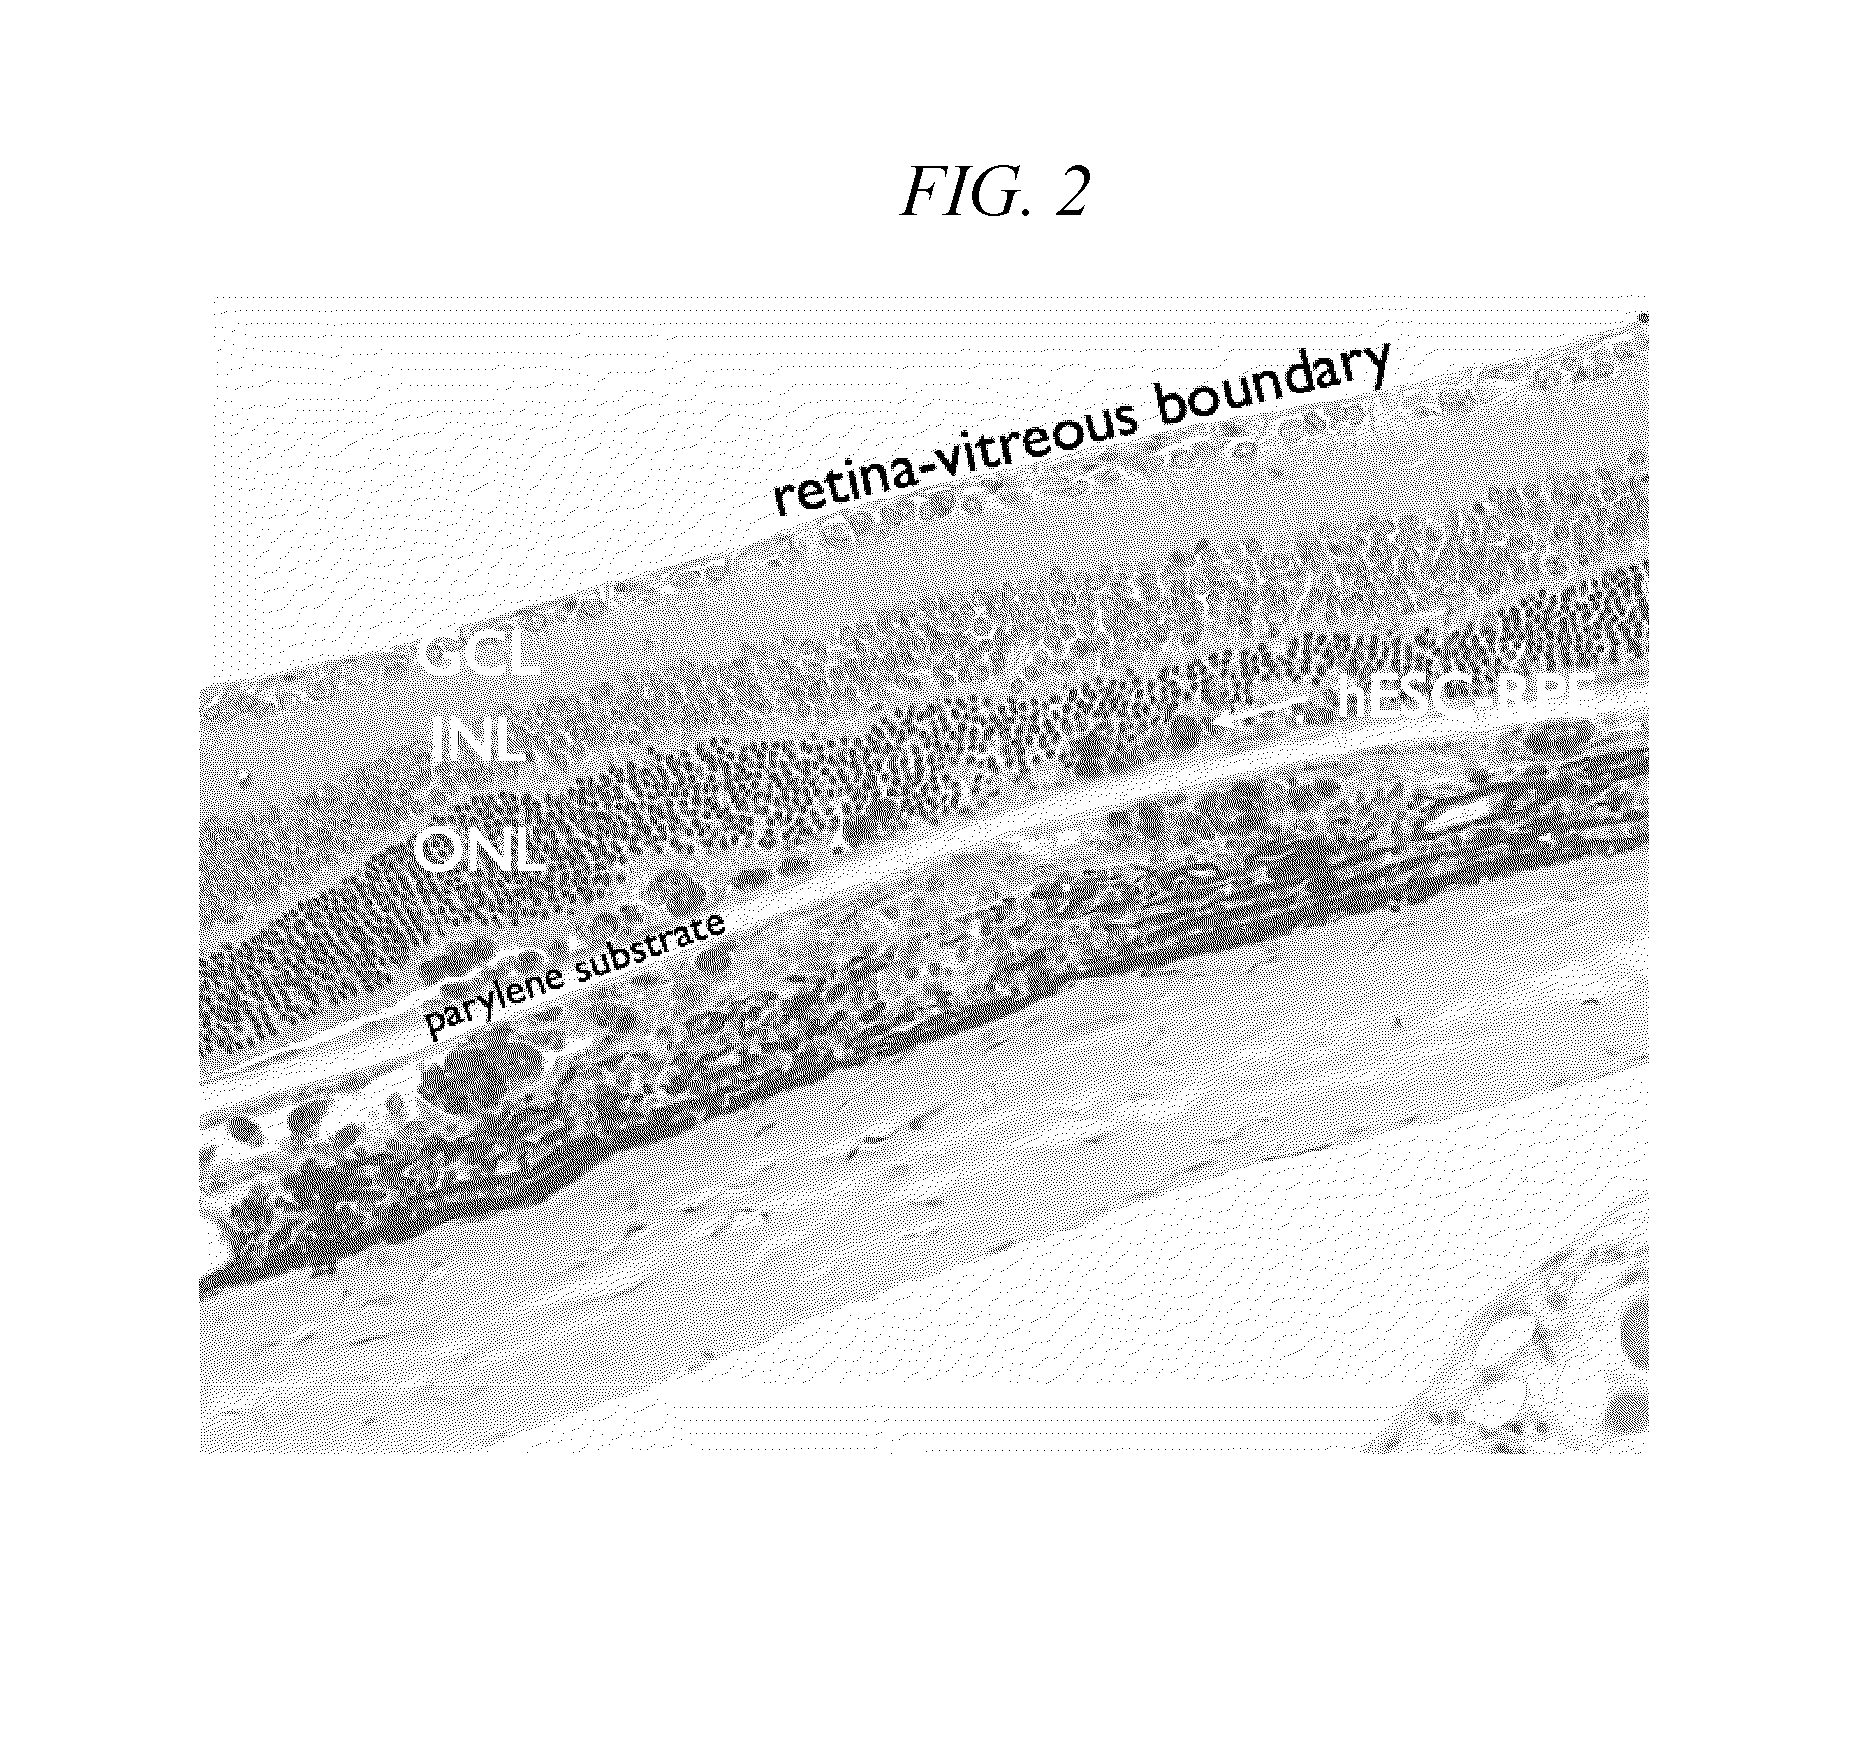 Method of cryopreservation of stem cell-derived retinal pigment epithelial cells on polymeric substrate